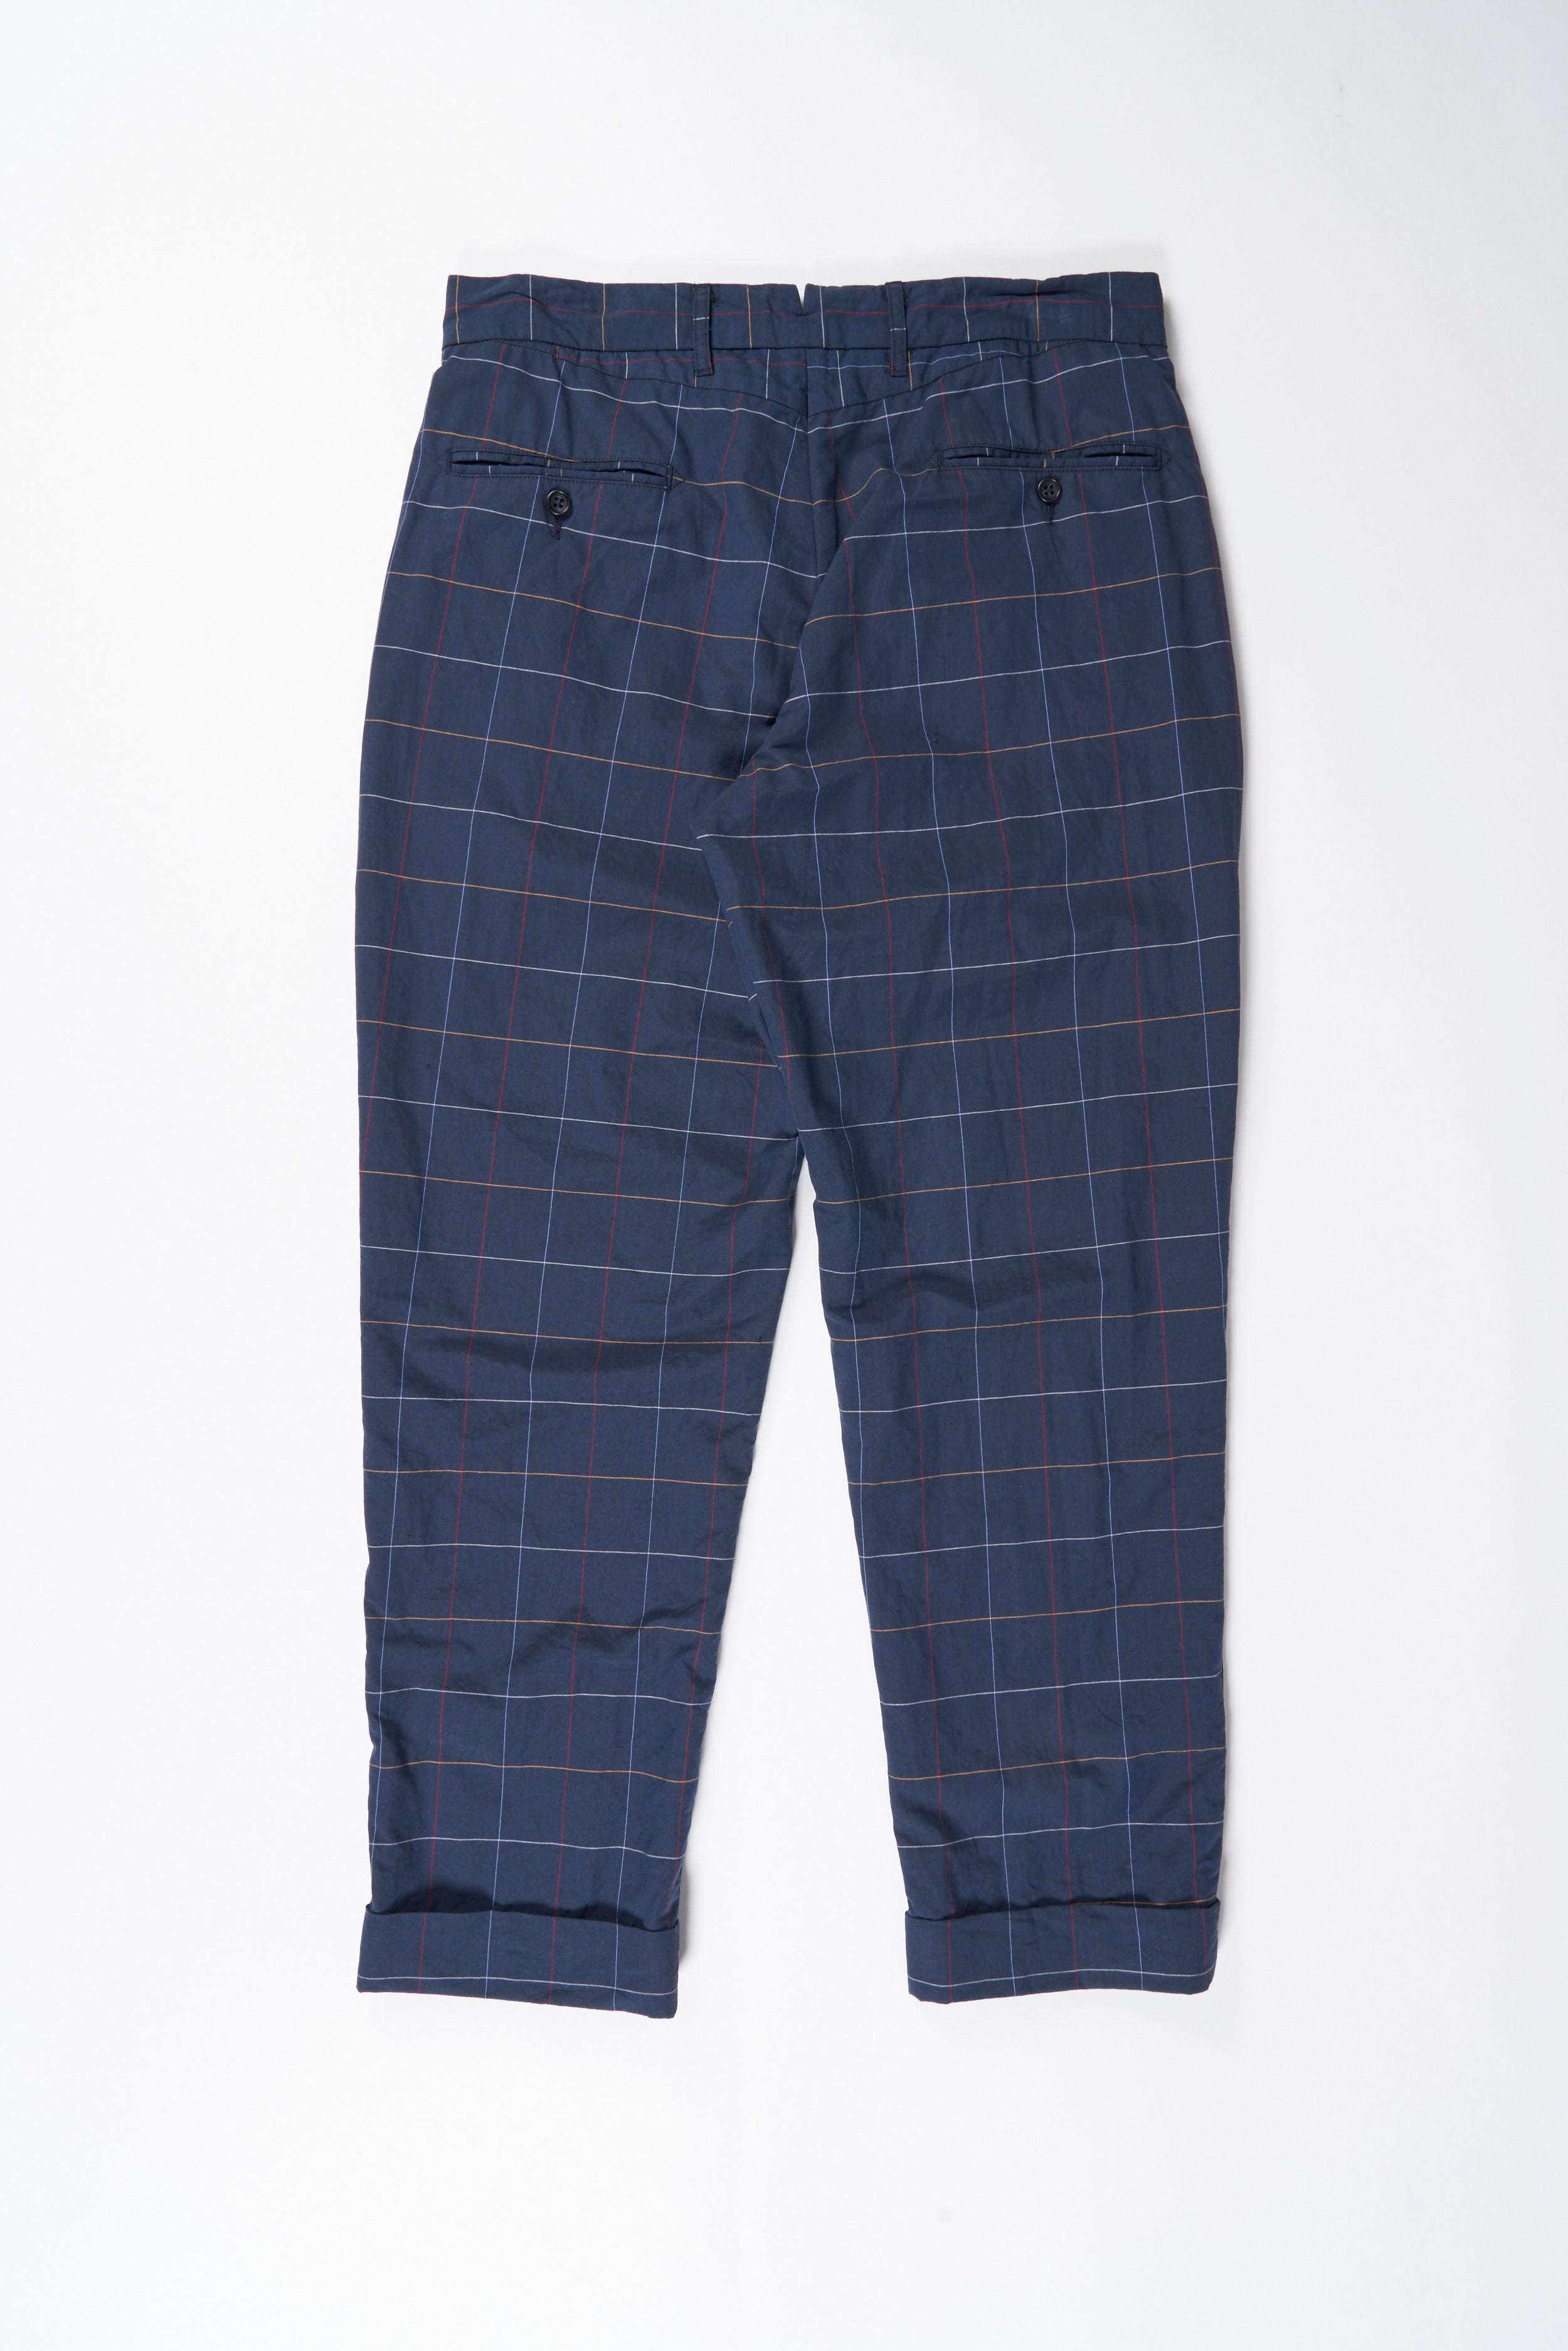 Andover Pant - Navy CL Windowpane